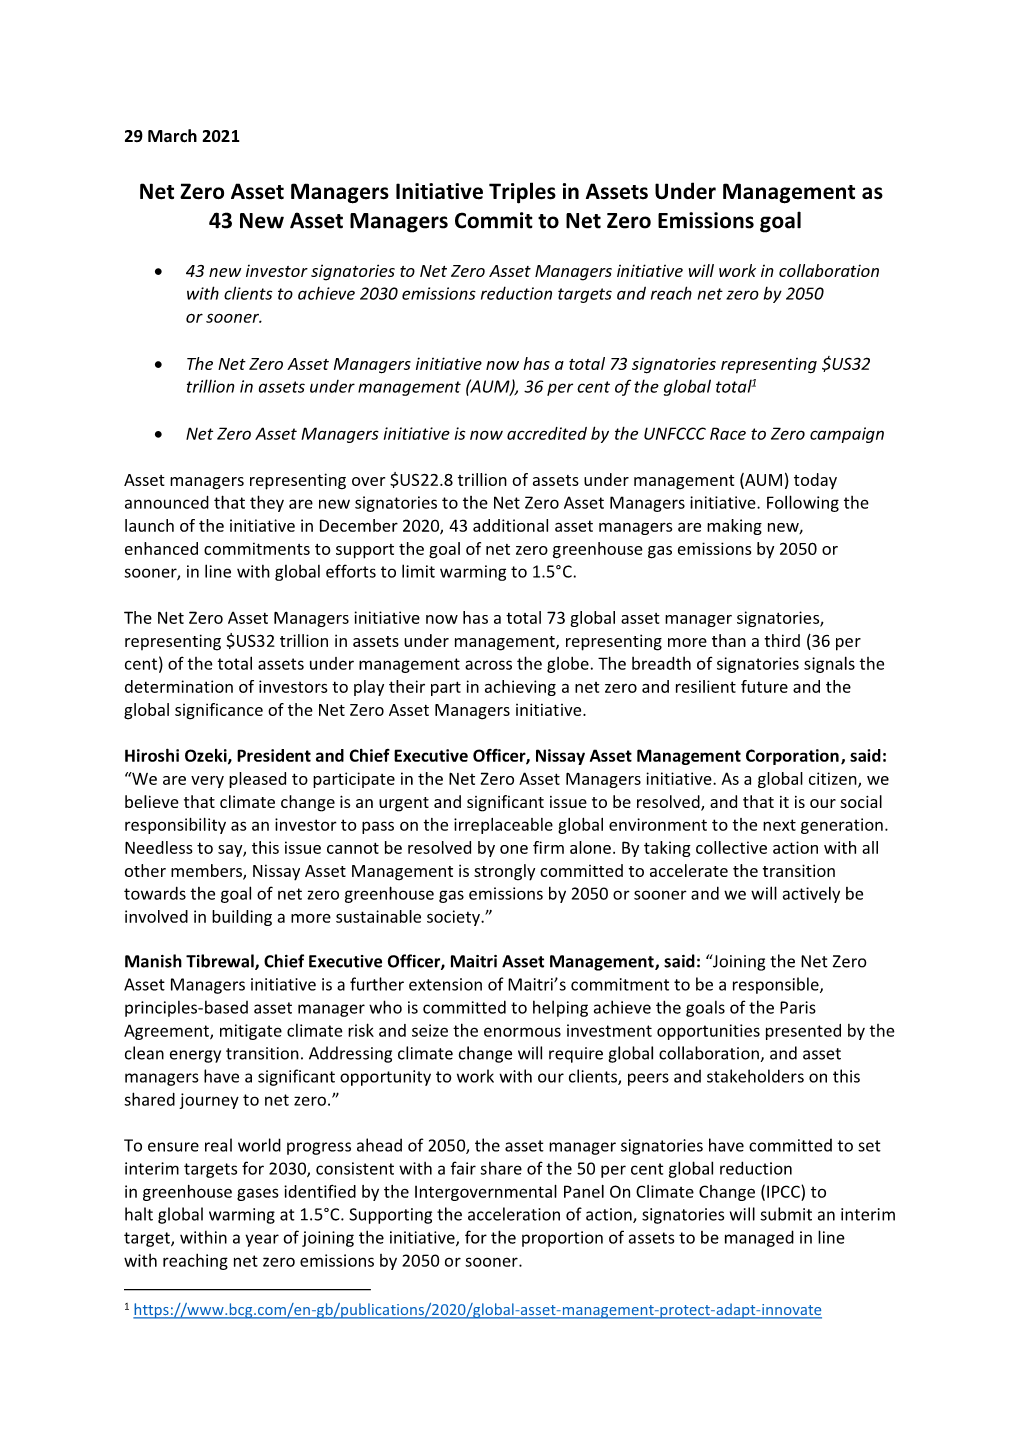 Net Zero Asset Managers Initiative Triples in Assets Under Management As 43 New Asset Managers Commit to Net Zero Emissions Goal